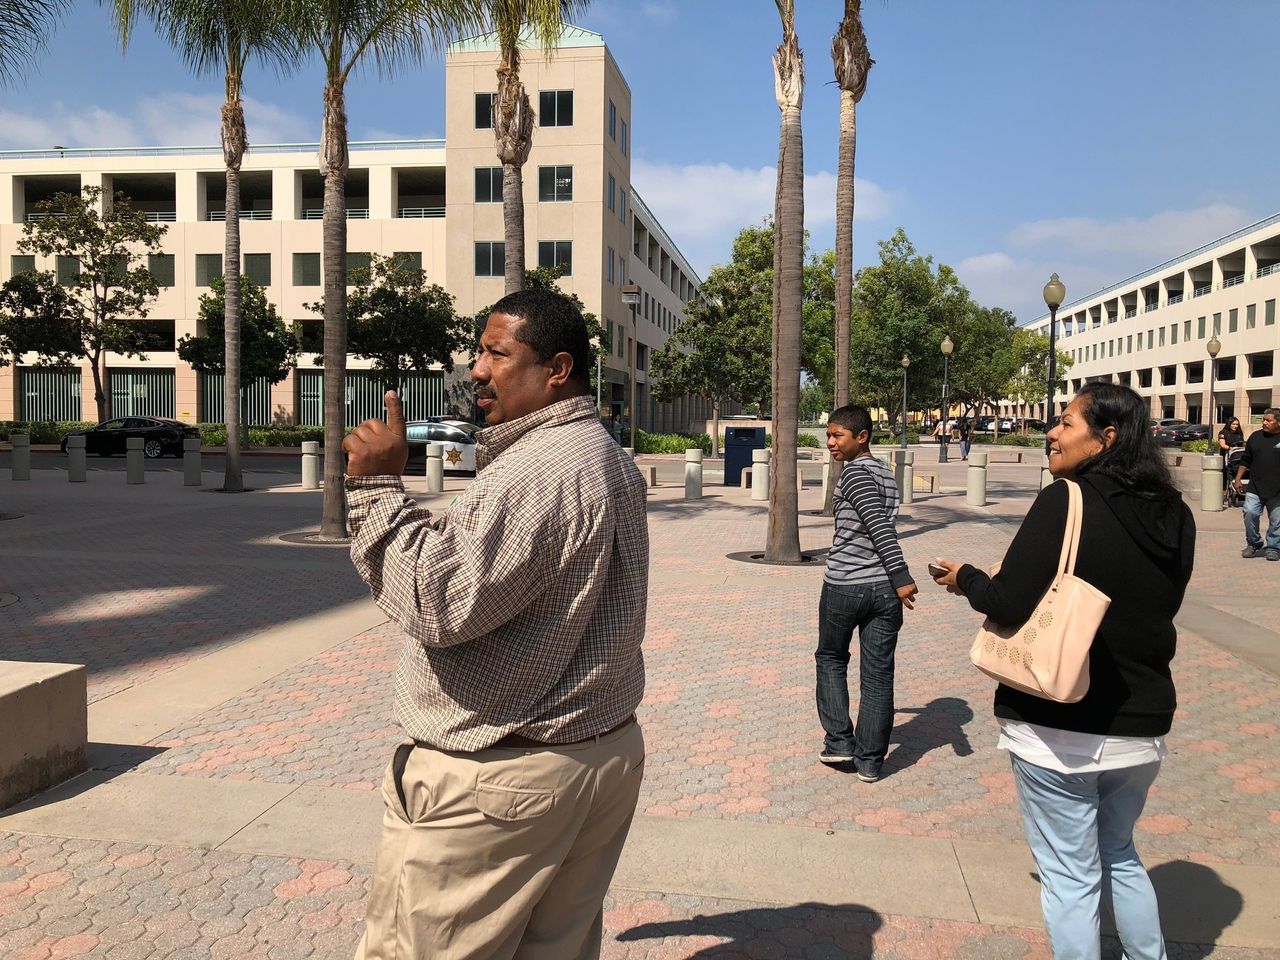 Cesar Gaspar Sr. (left), his wife, Kenia (right), and their son, Cesar (center), leave the Lamoreaux Justice Center in Orange after Cesar's August court hearing to celebrate with a family breakfast.